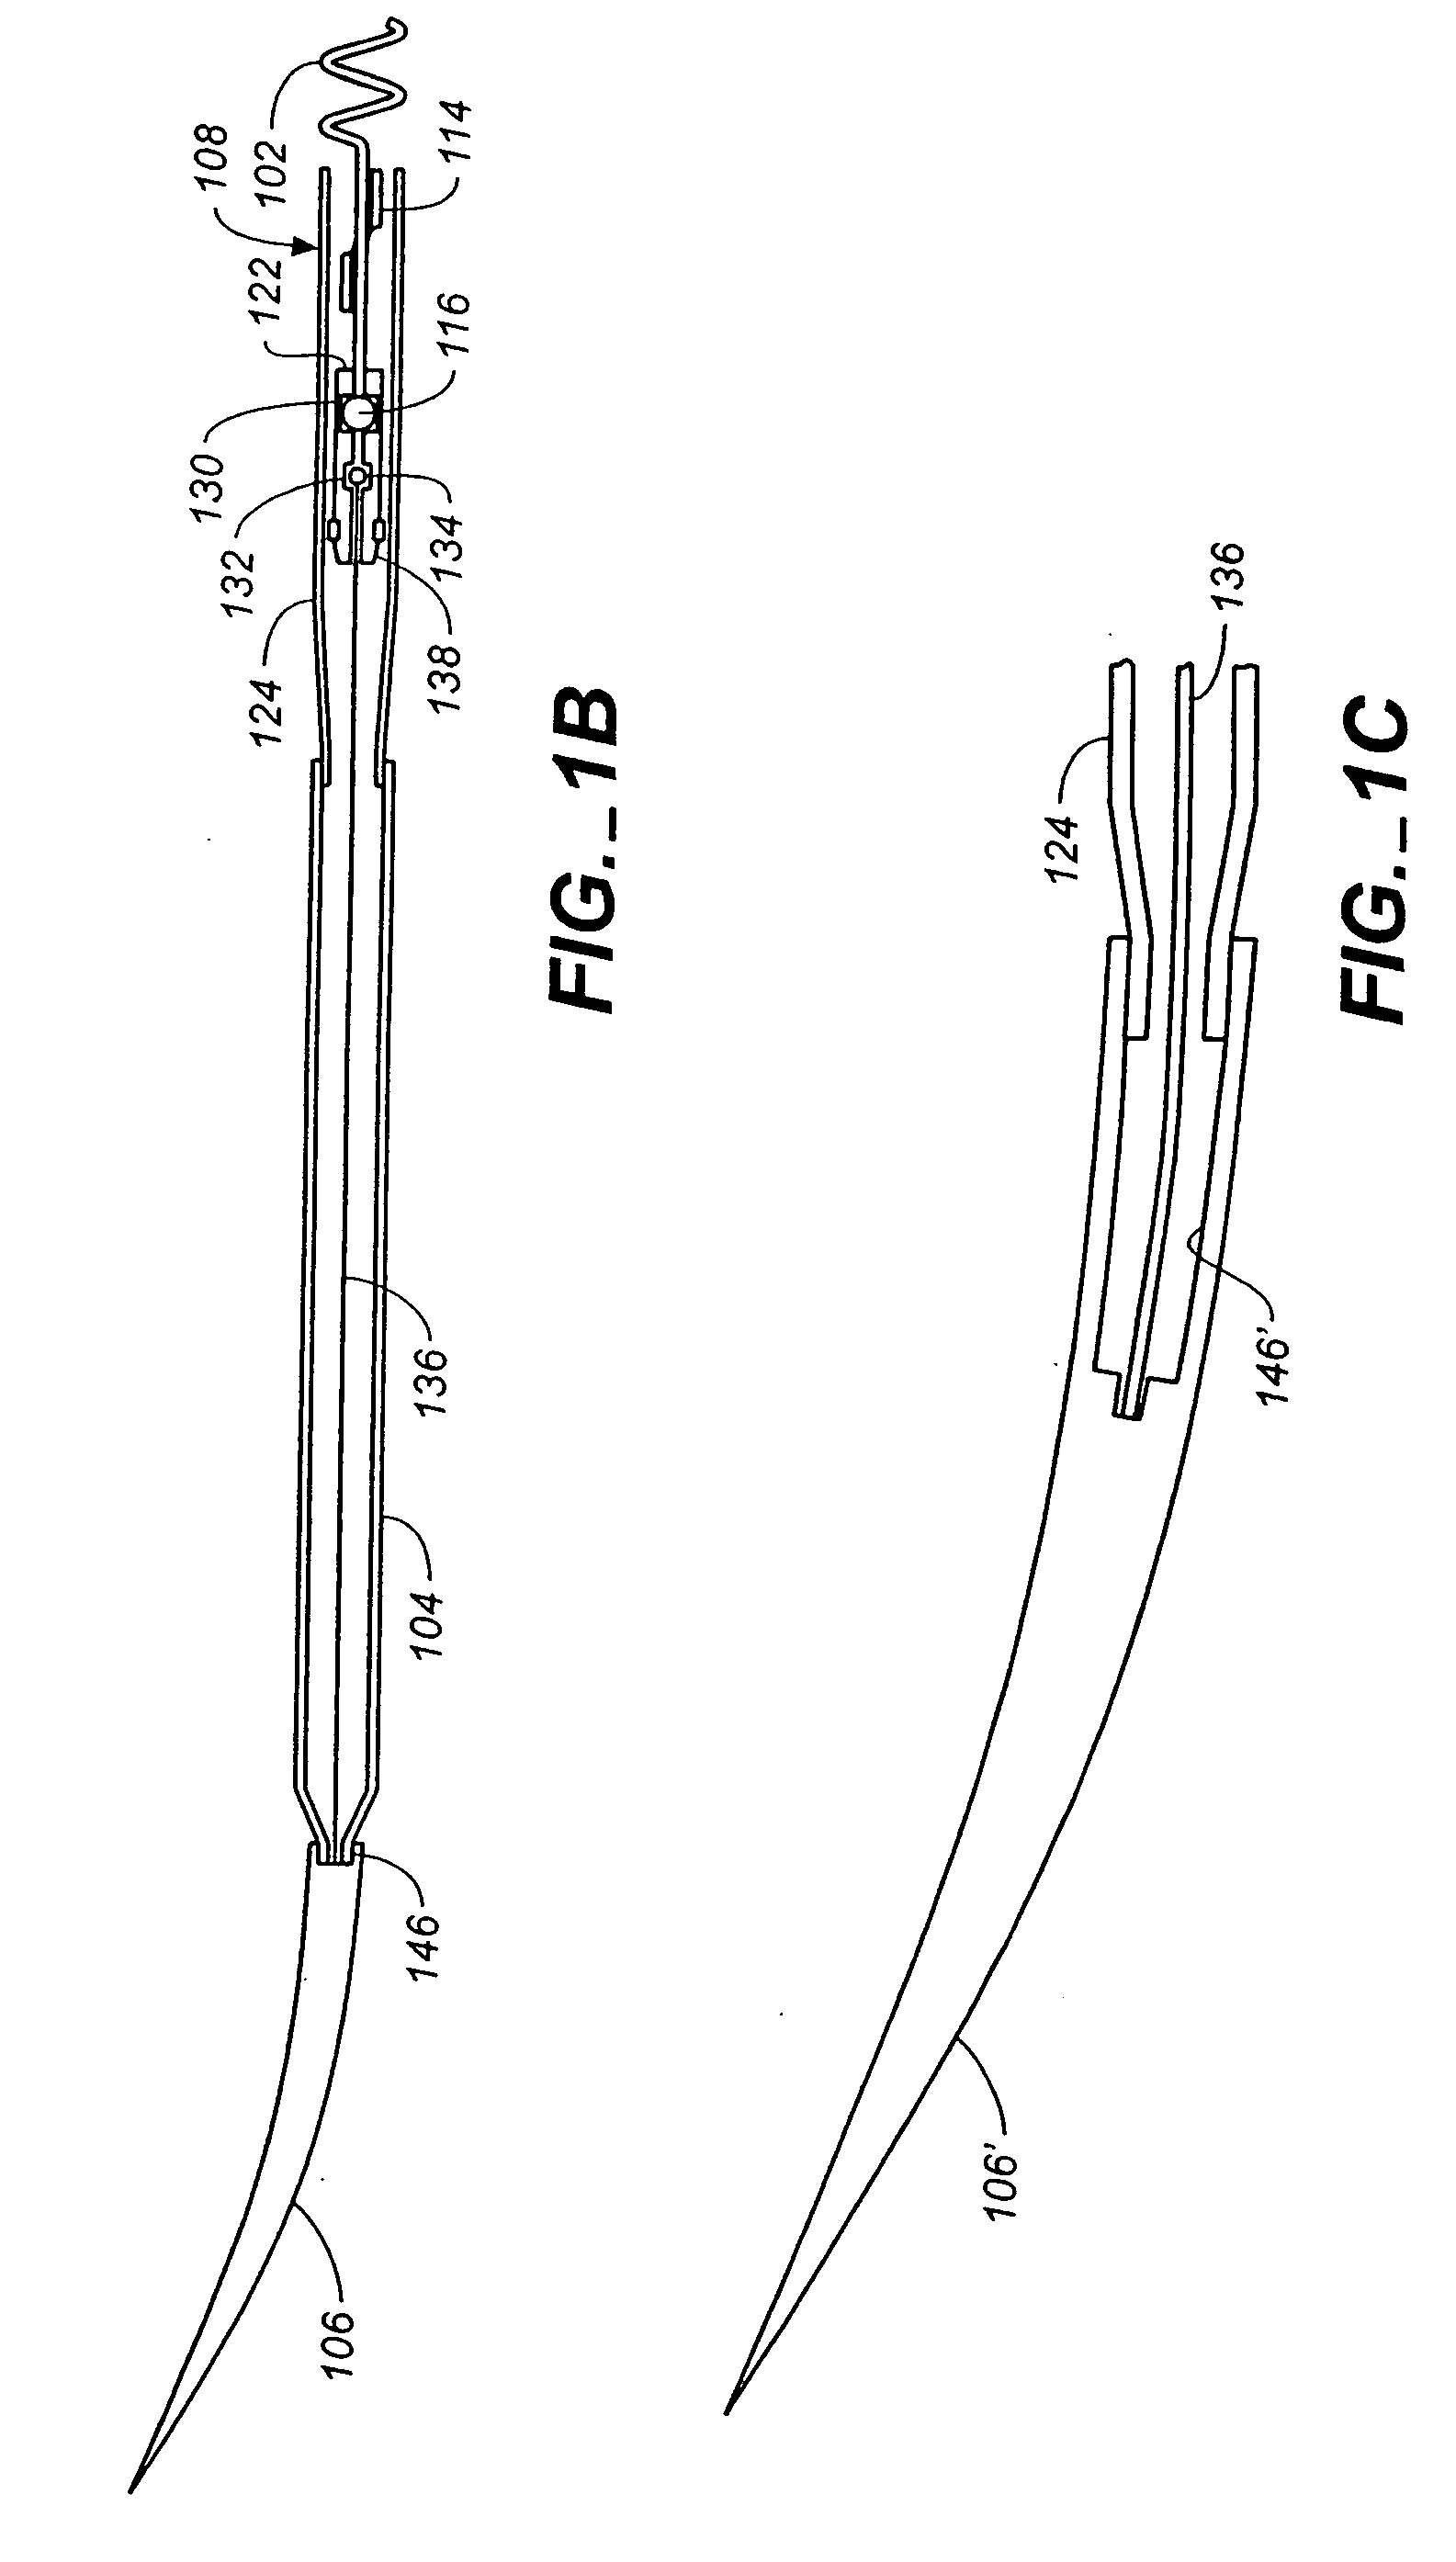 Annuloplasty apparatus and methods